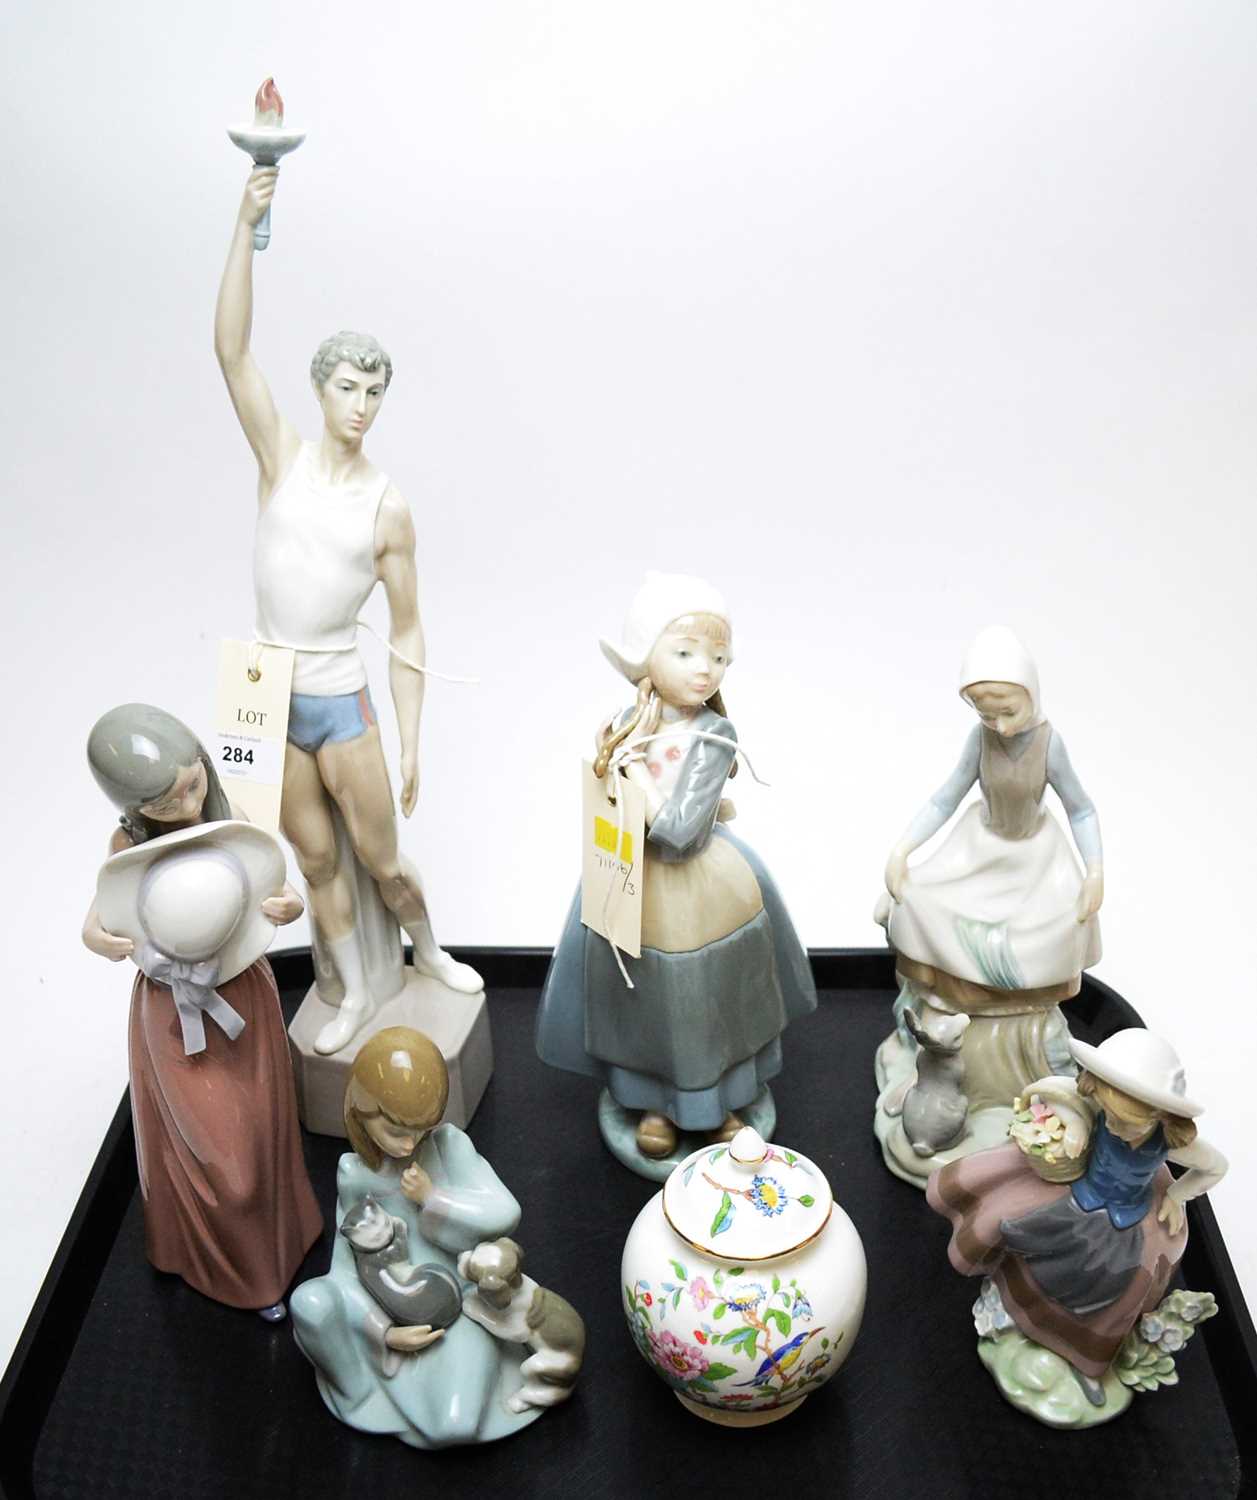 Lot 284 - A collection of six Lladro figurines and an Aynsley jar.